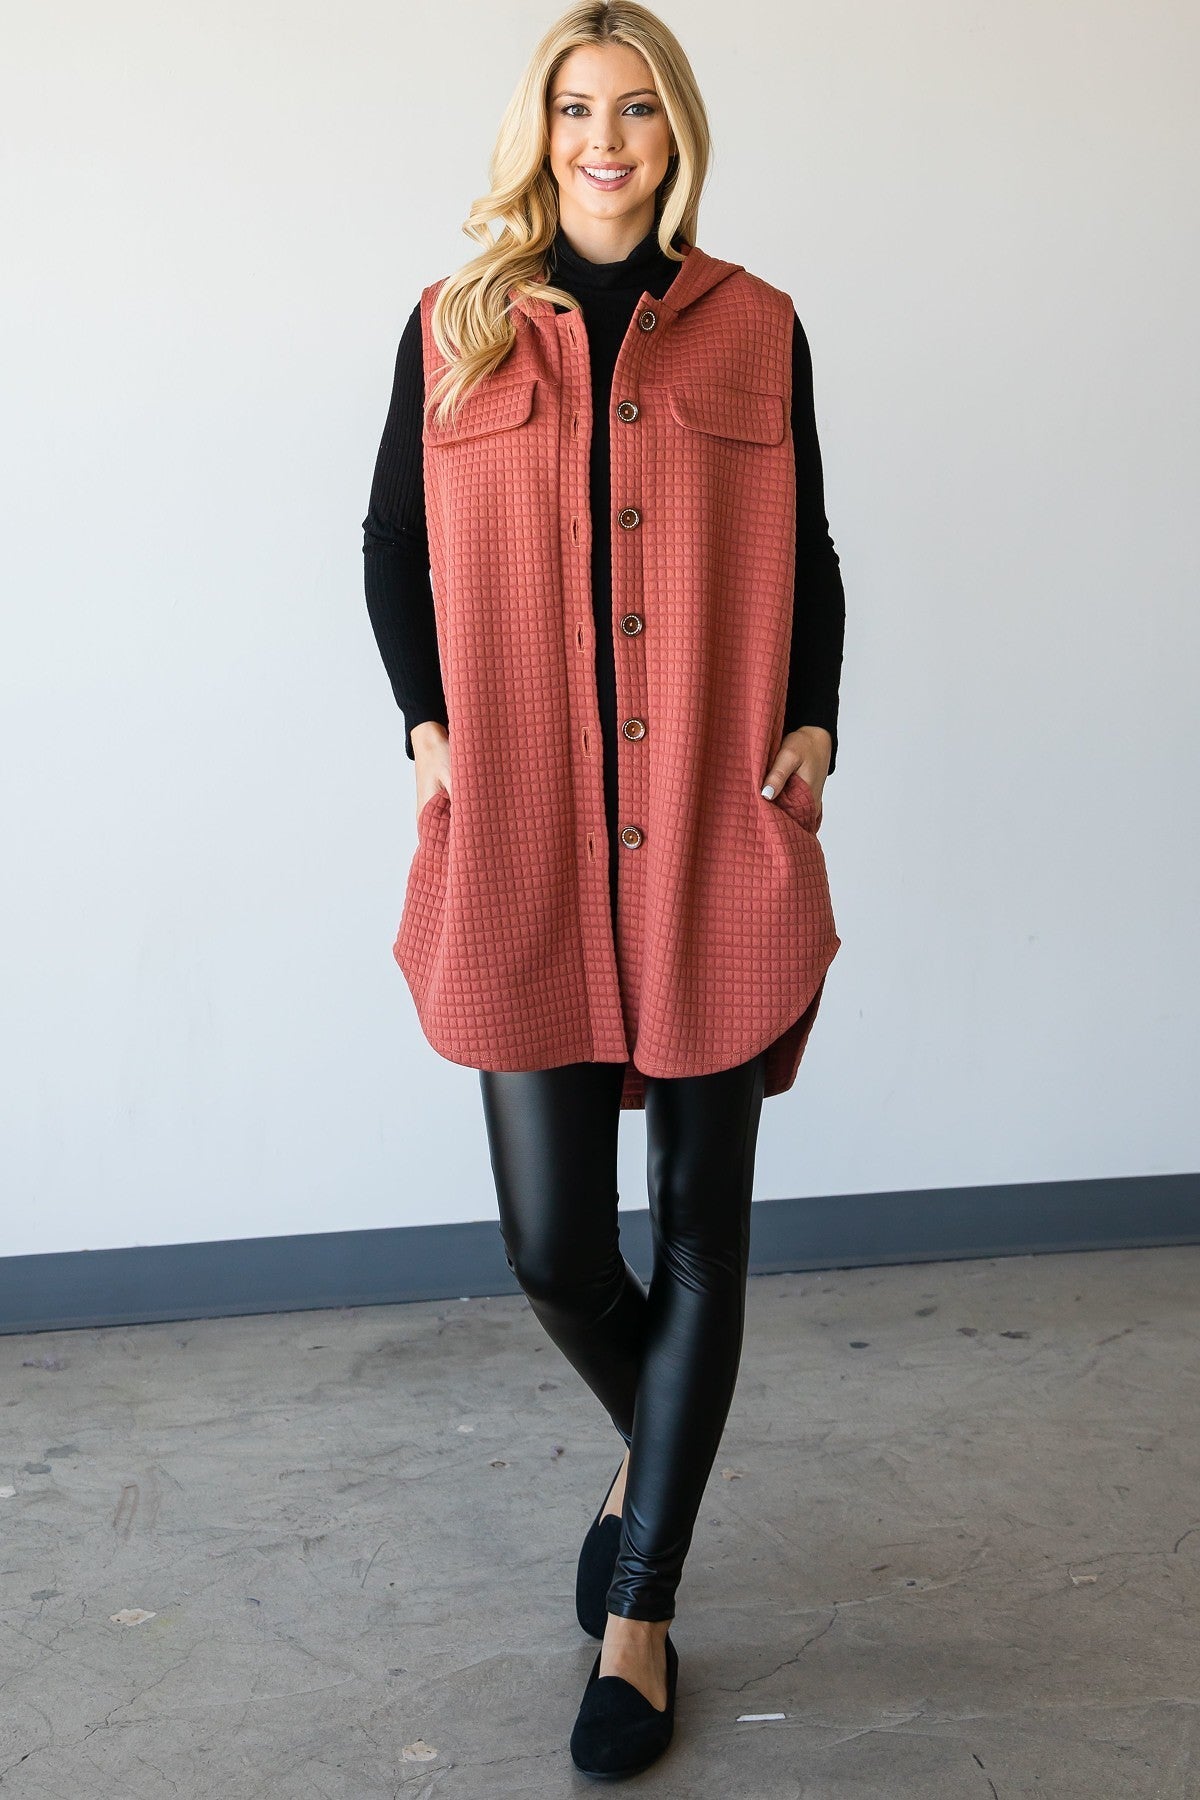 Vest-inspired Jacket With A Collared Neckline